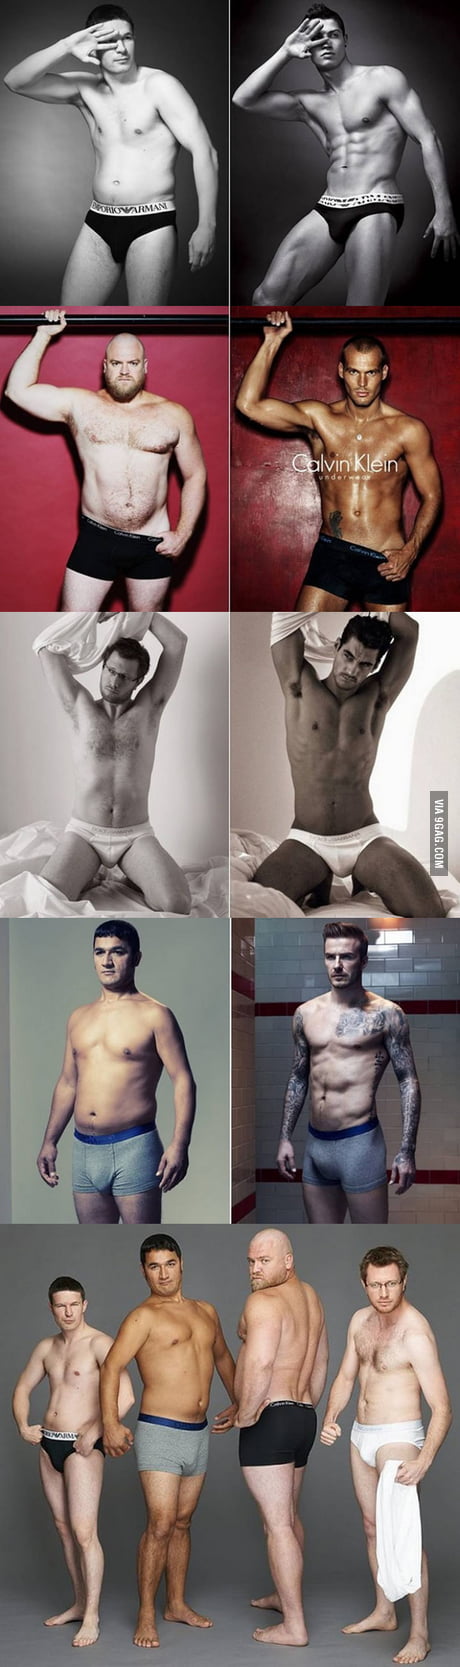 What body type do you find most attractive in men? - 9GAG